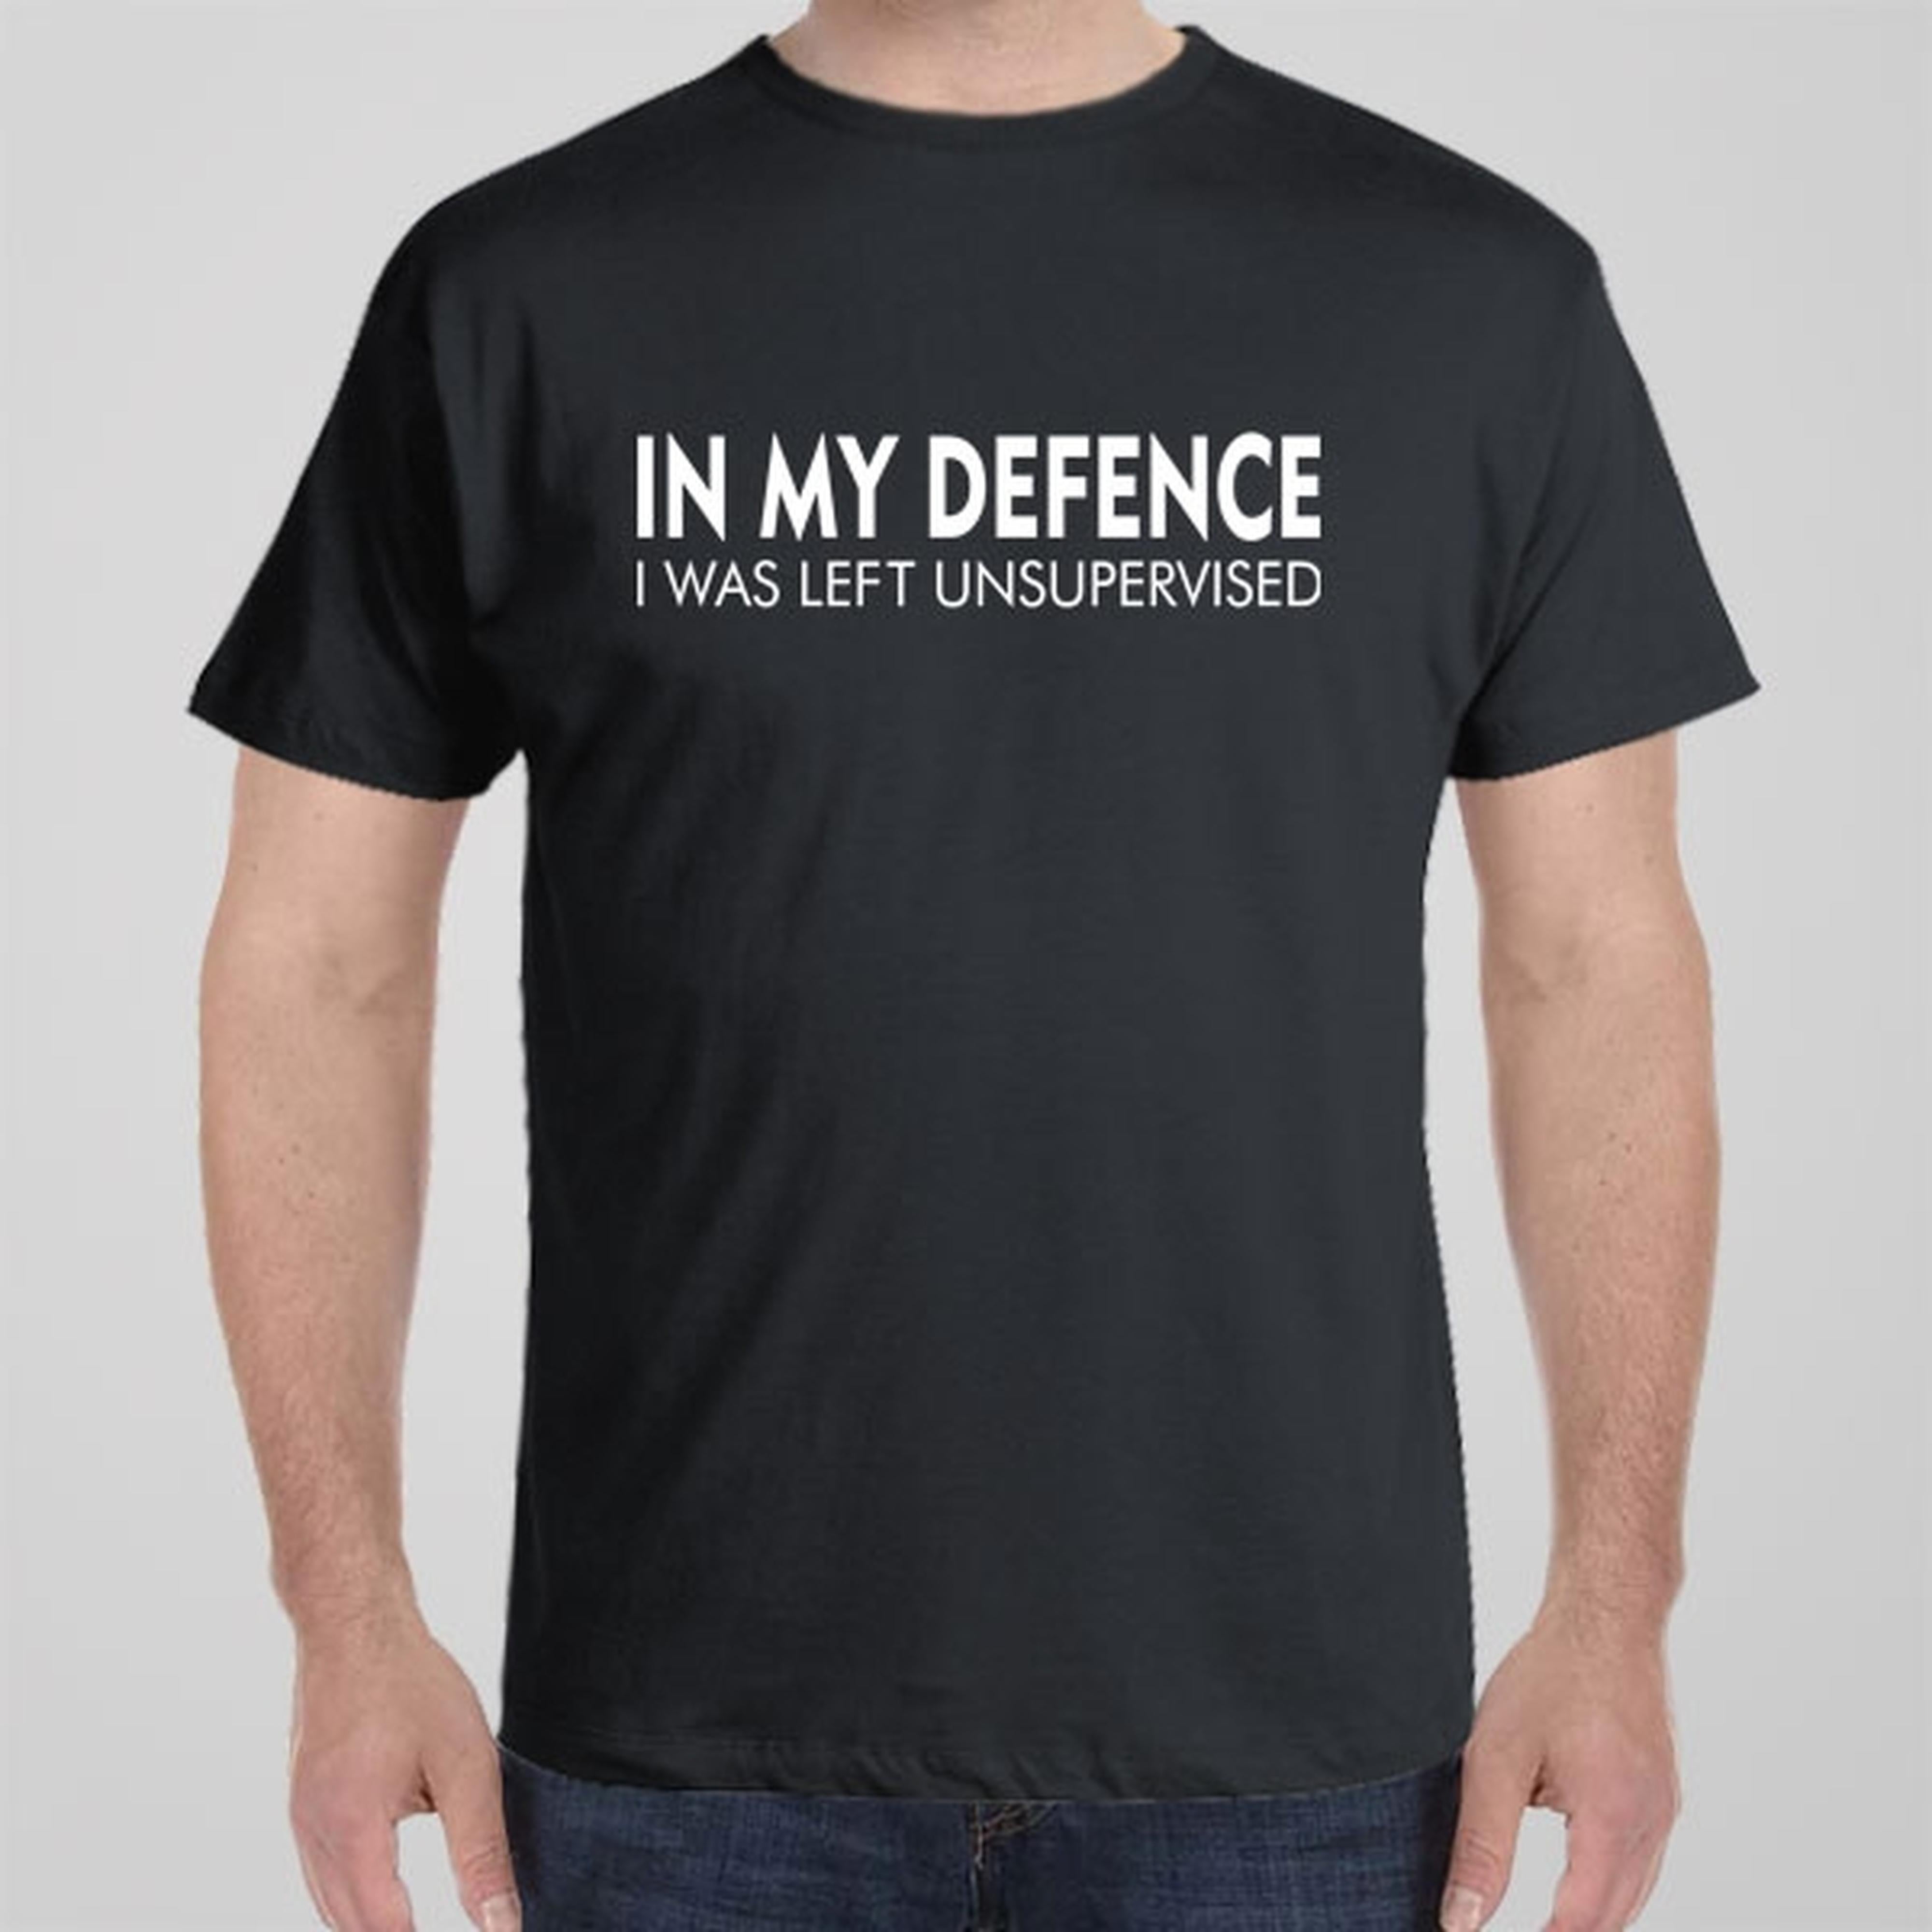 in-my-defence-i-was-left-unsupervised-t-shirt